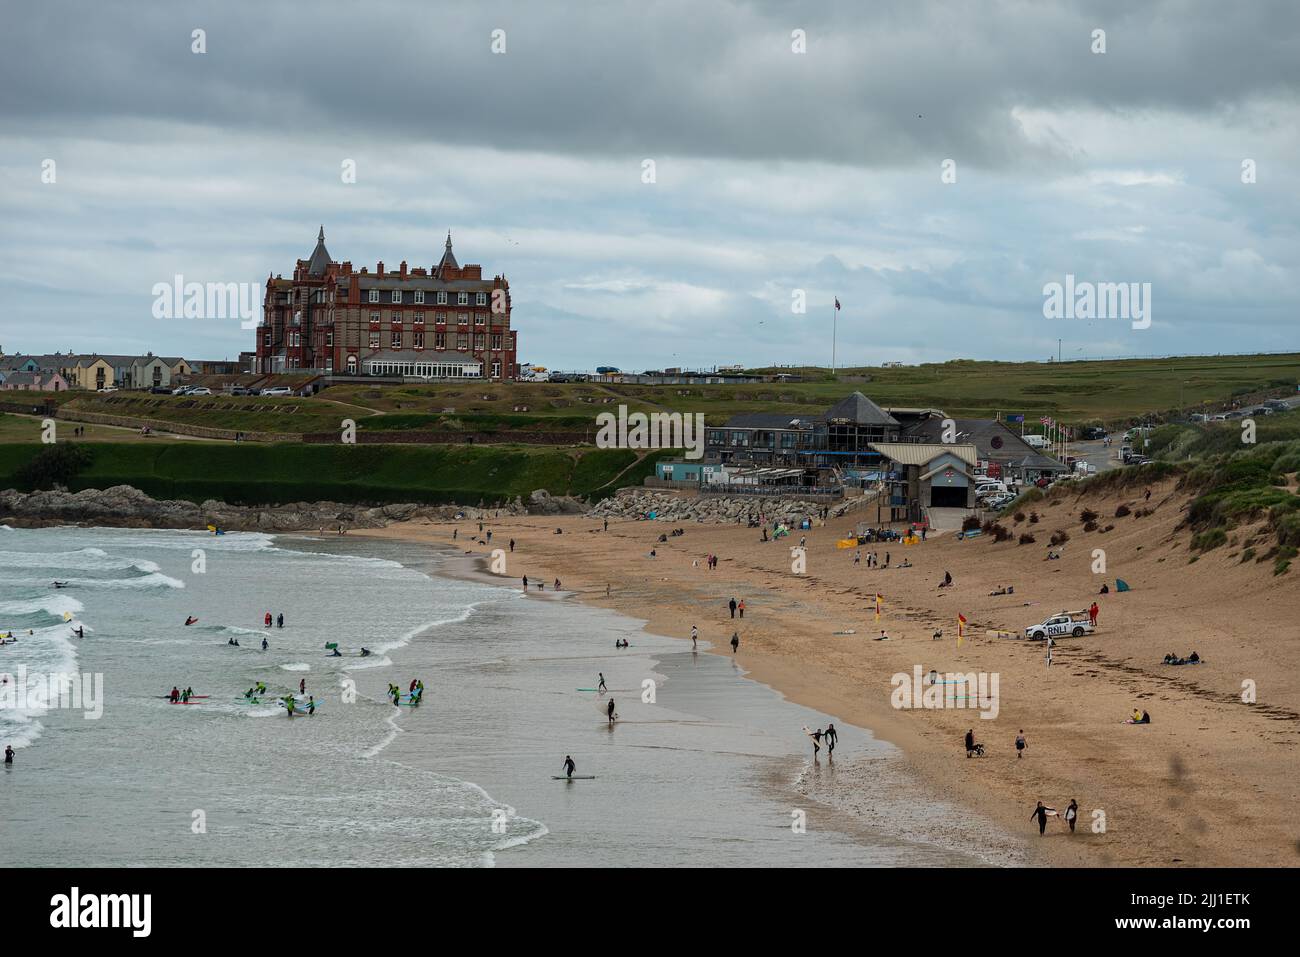 people learning to surf and swim at Fistral Beach and with The Headland Cornwall hotel in the background, Fistral Beach UK Stock Photo